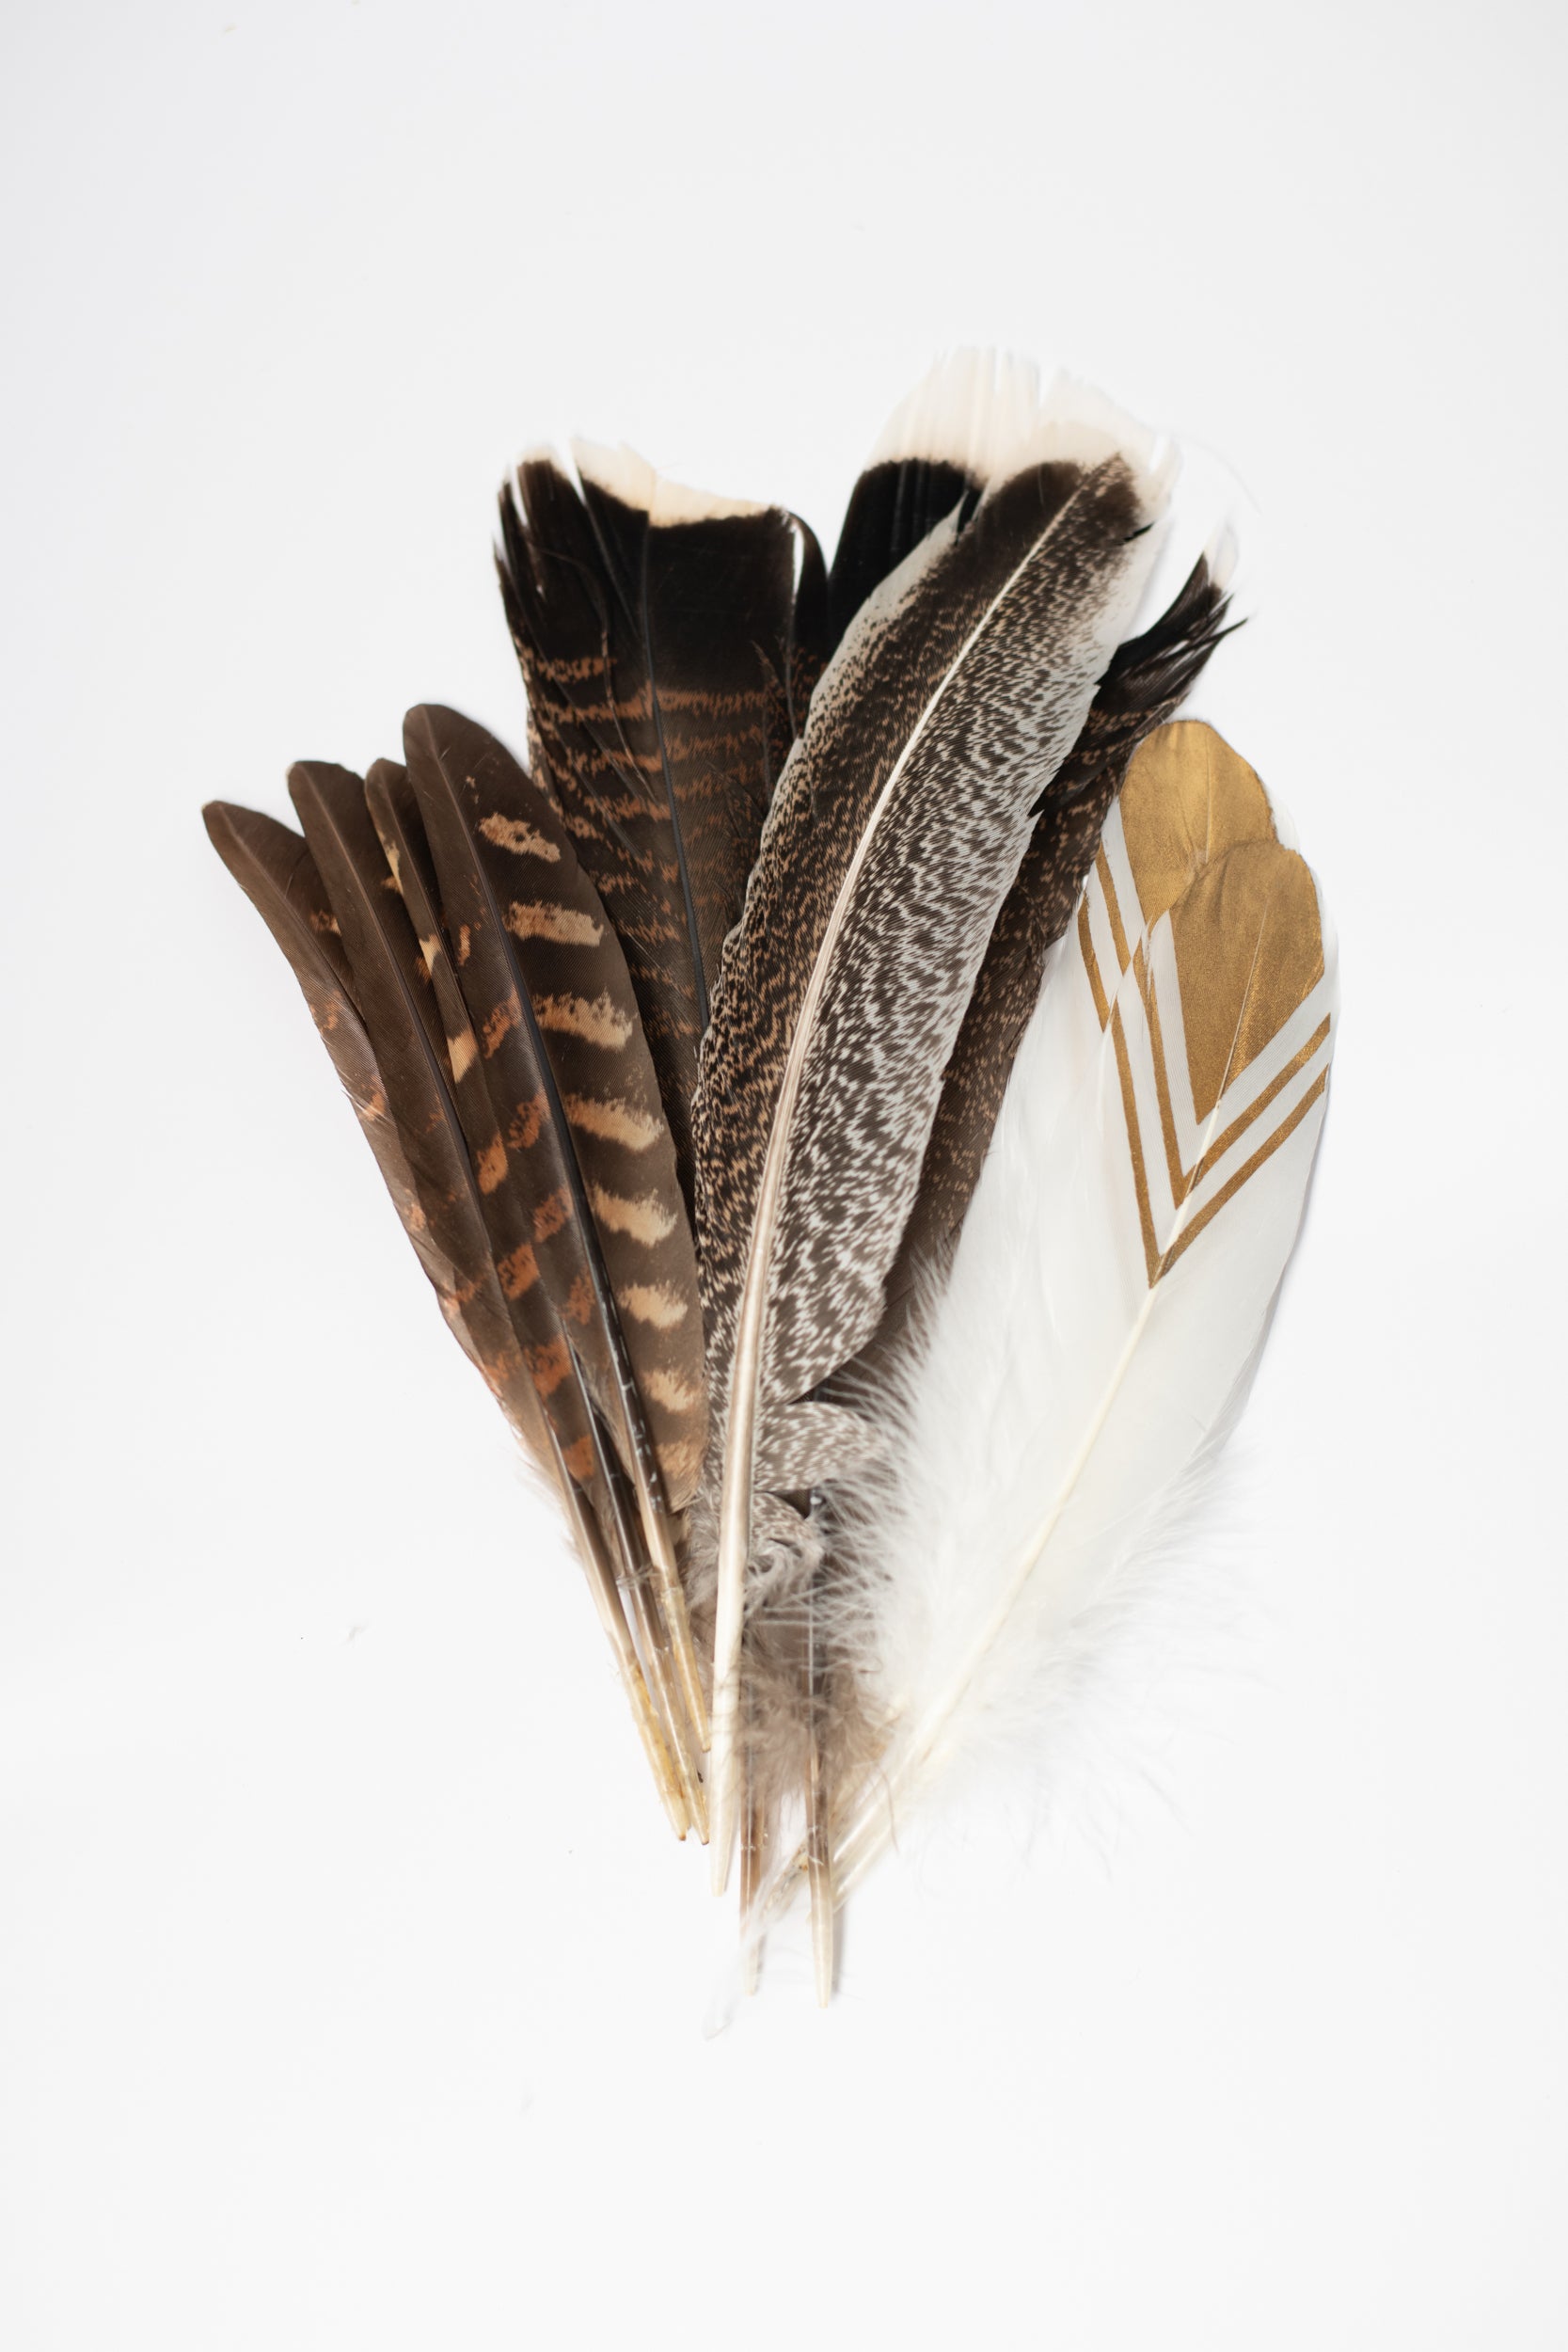 smudge smudging feather, Sustainable clearing, cleansing, smoking ceremony, sacred, protection, harmony, sacred ceremonial circle, fiona gray herbalist, blessed botanicals apothecary, ancestors, ancient practices, shaman shamanic, goose feather, turkey feather, pheasant feather, tail wing hand painted